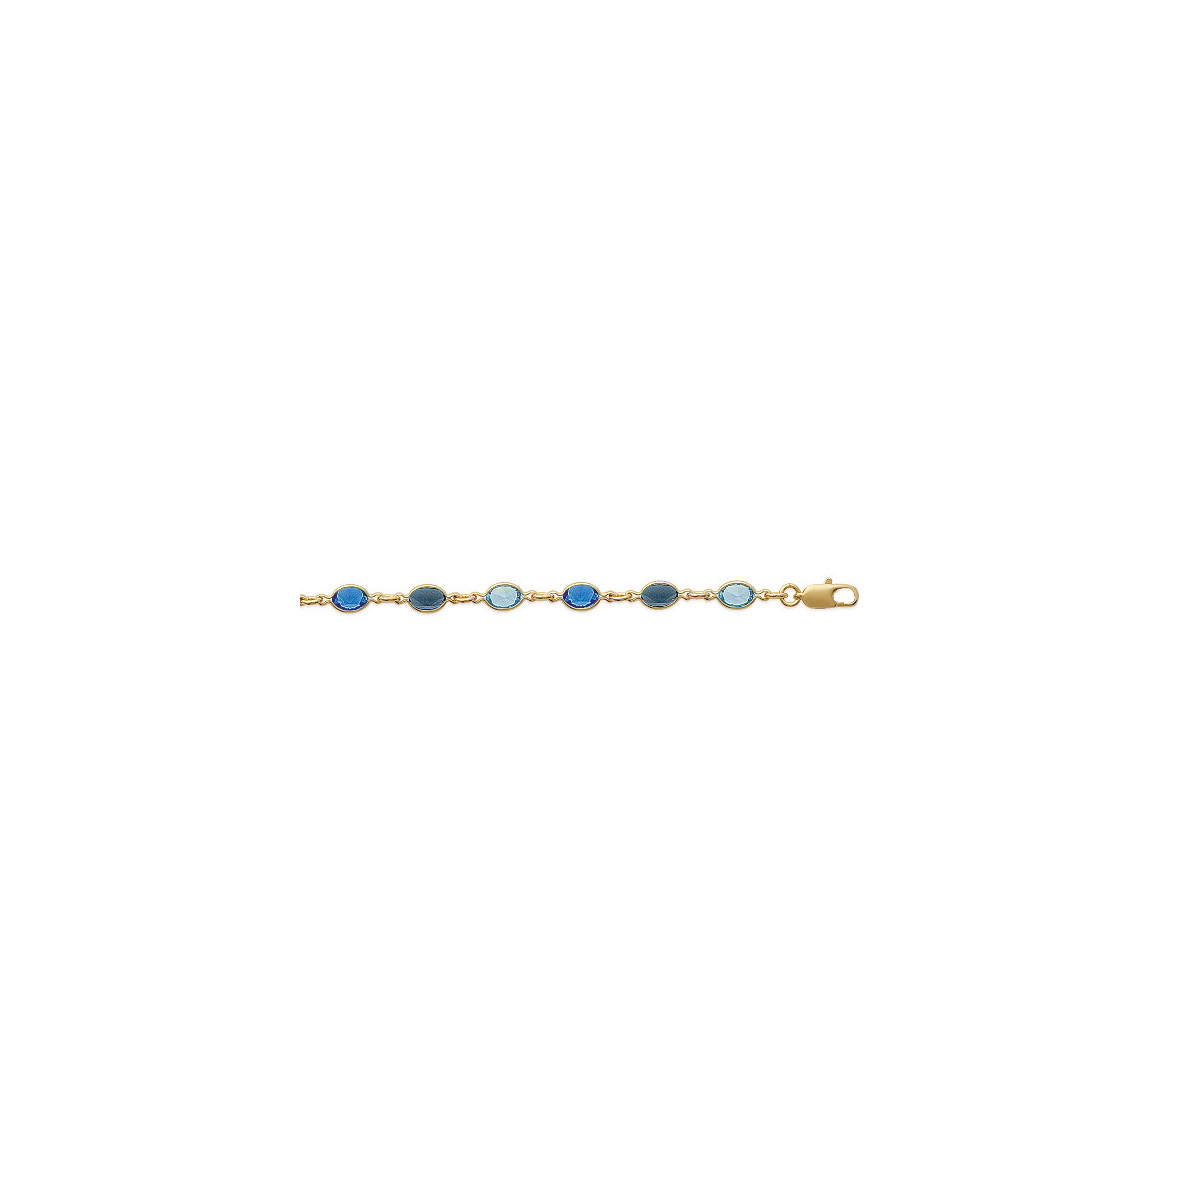 GOLD PLATED SILVER BRACELET WITH BLUE CRYSTALS